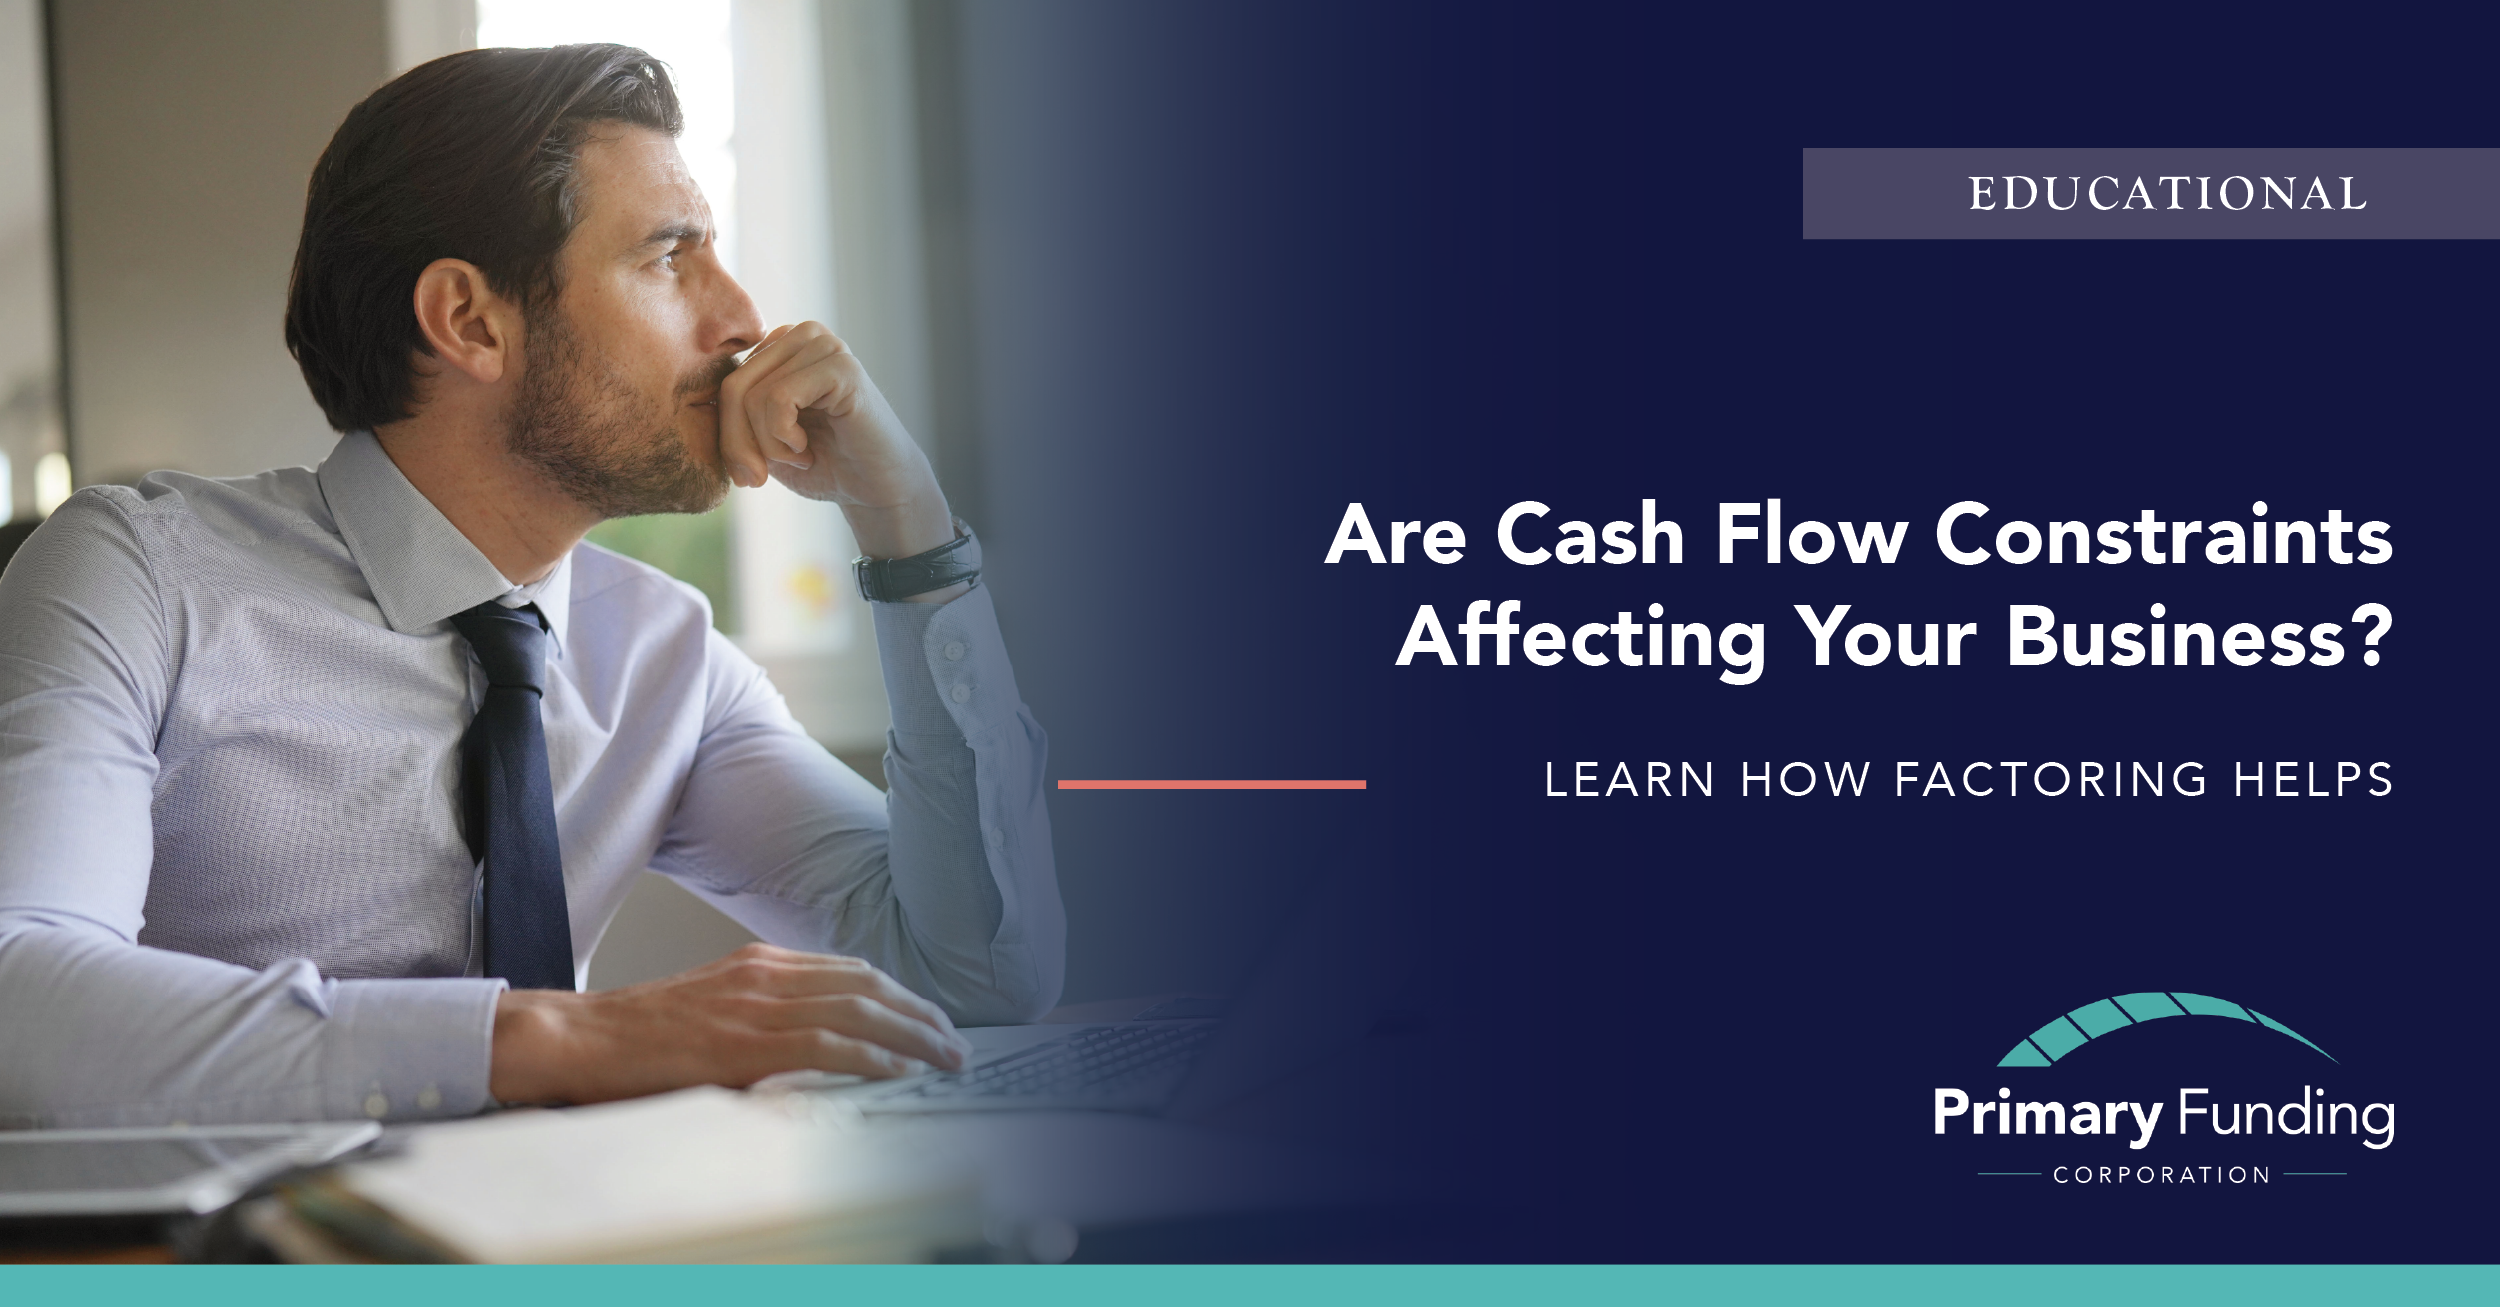 10 Are These Cashflow Constraints Impacting Your Business